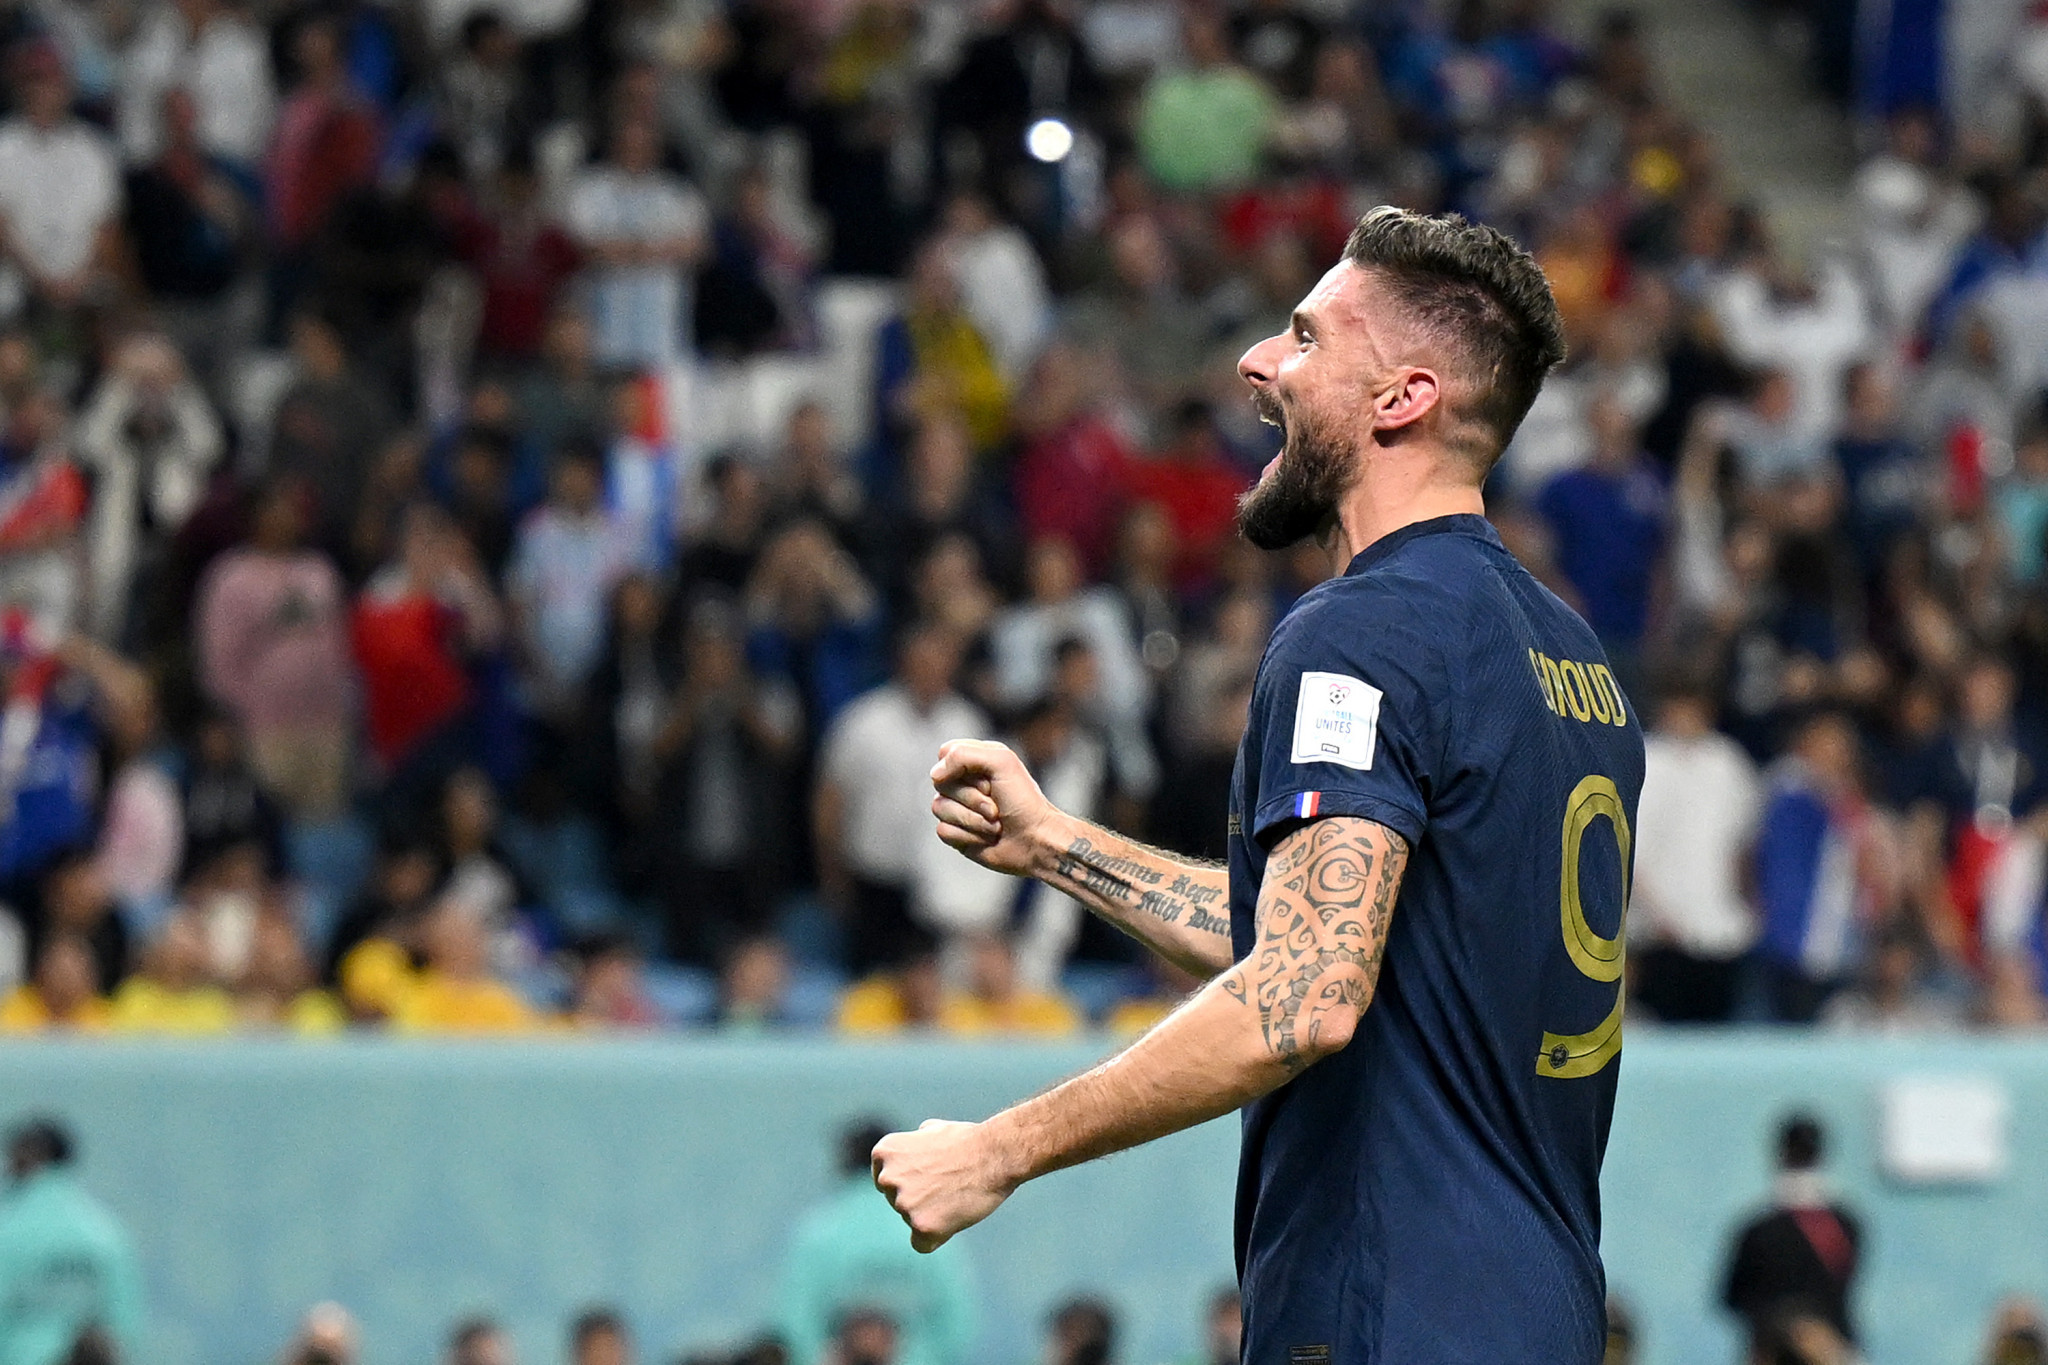 Olivier Giroud equalled Thierry Henry's goalscoring record for France in the country's 4-1 over Australia ©Getty Images